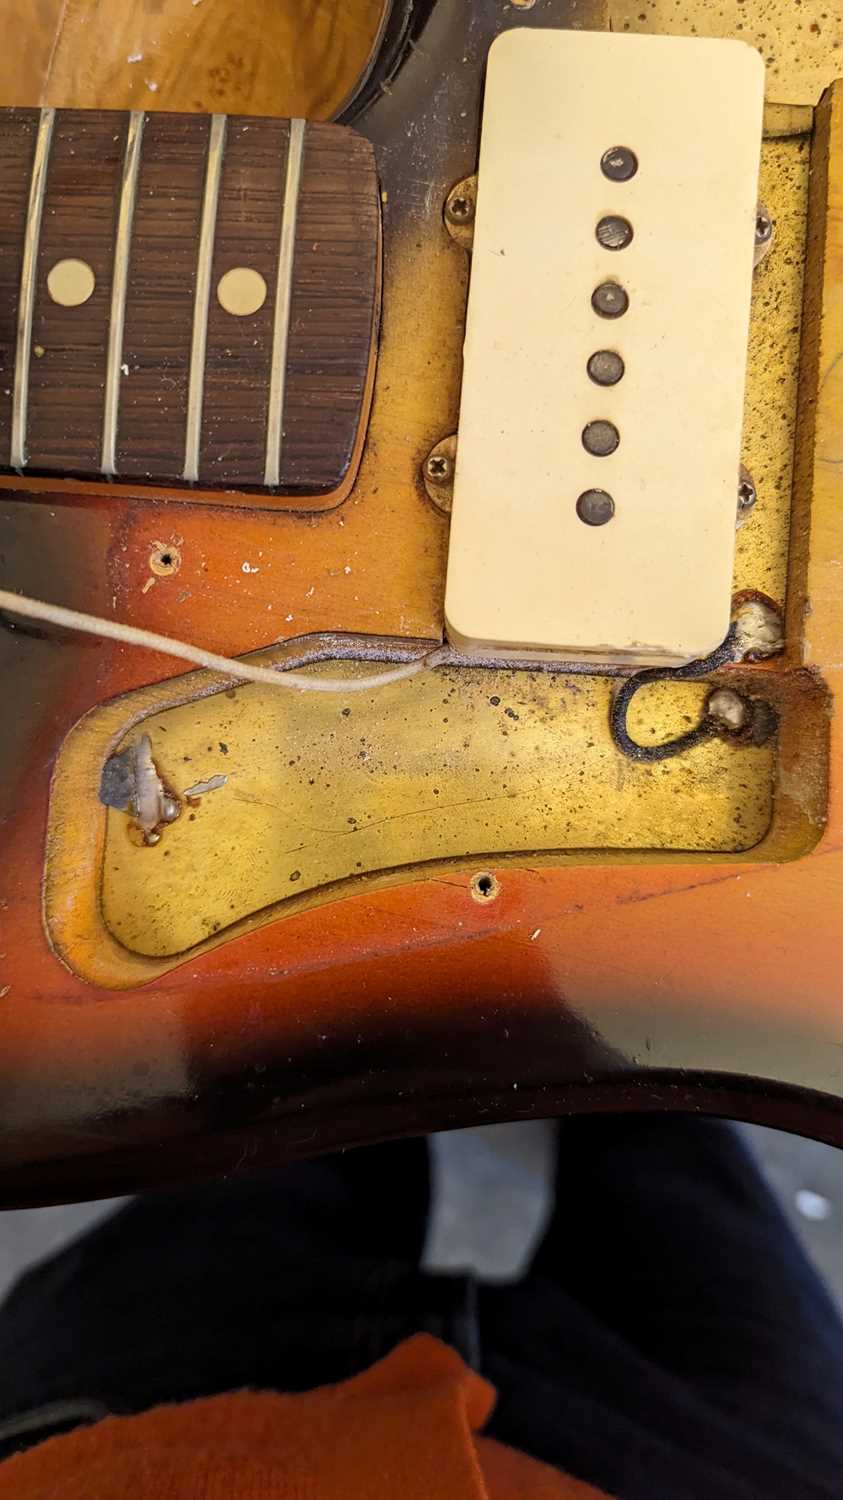 A 1965 Fender Jazzmaster electric guitar, - Image 11 of 16